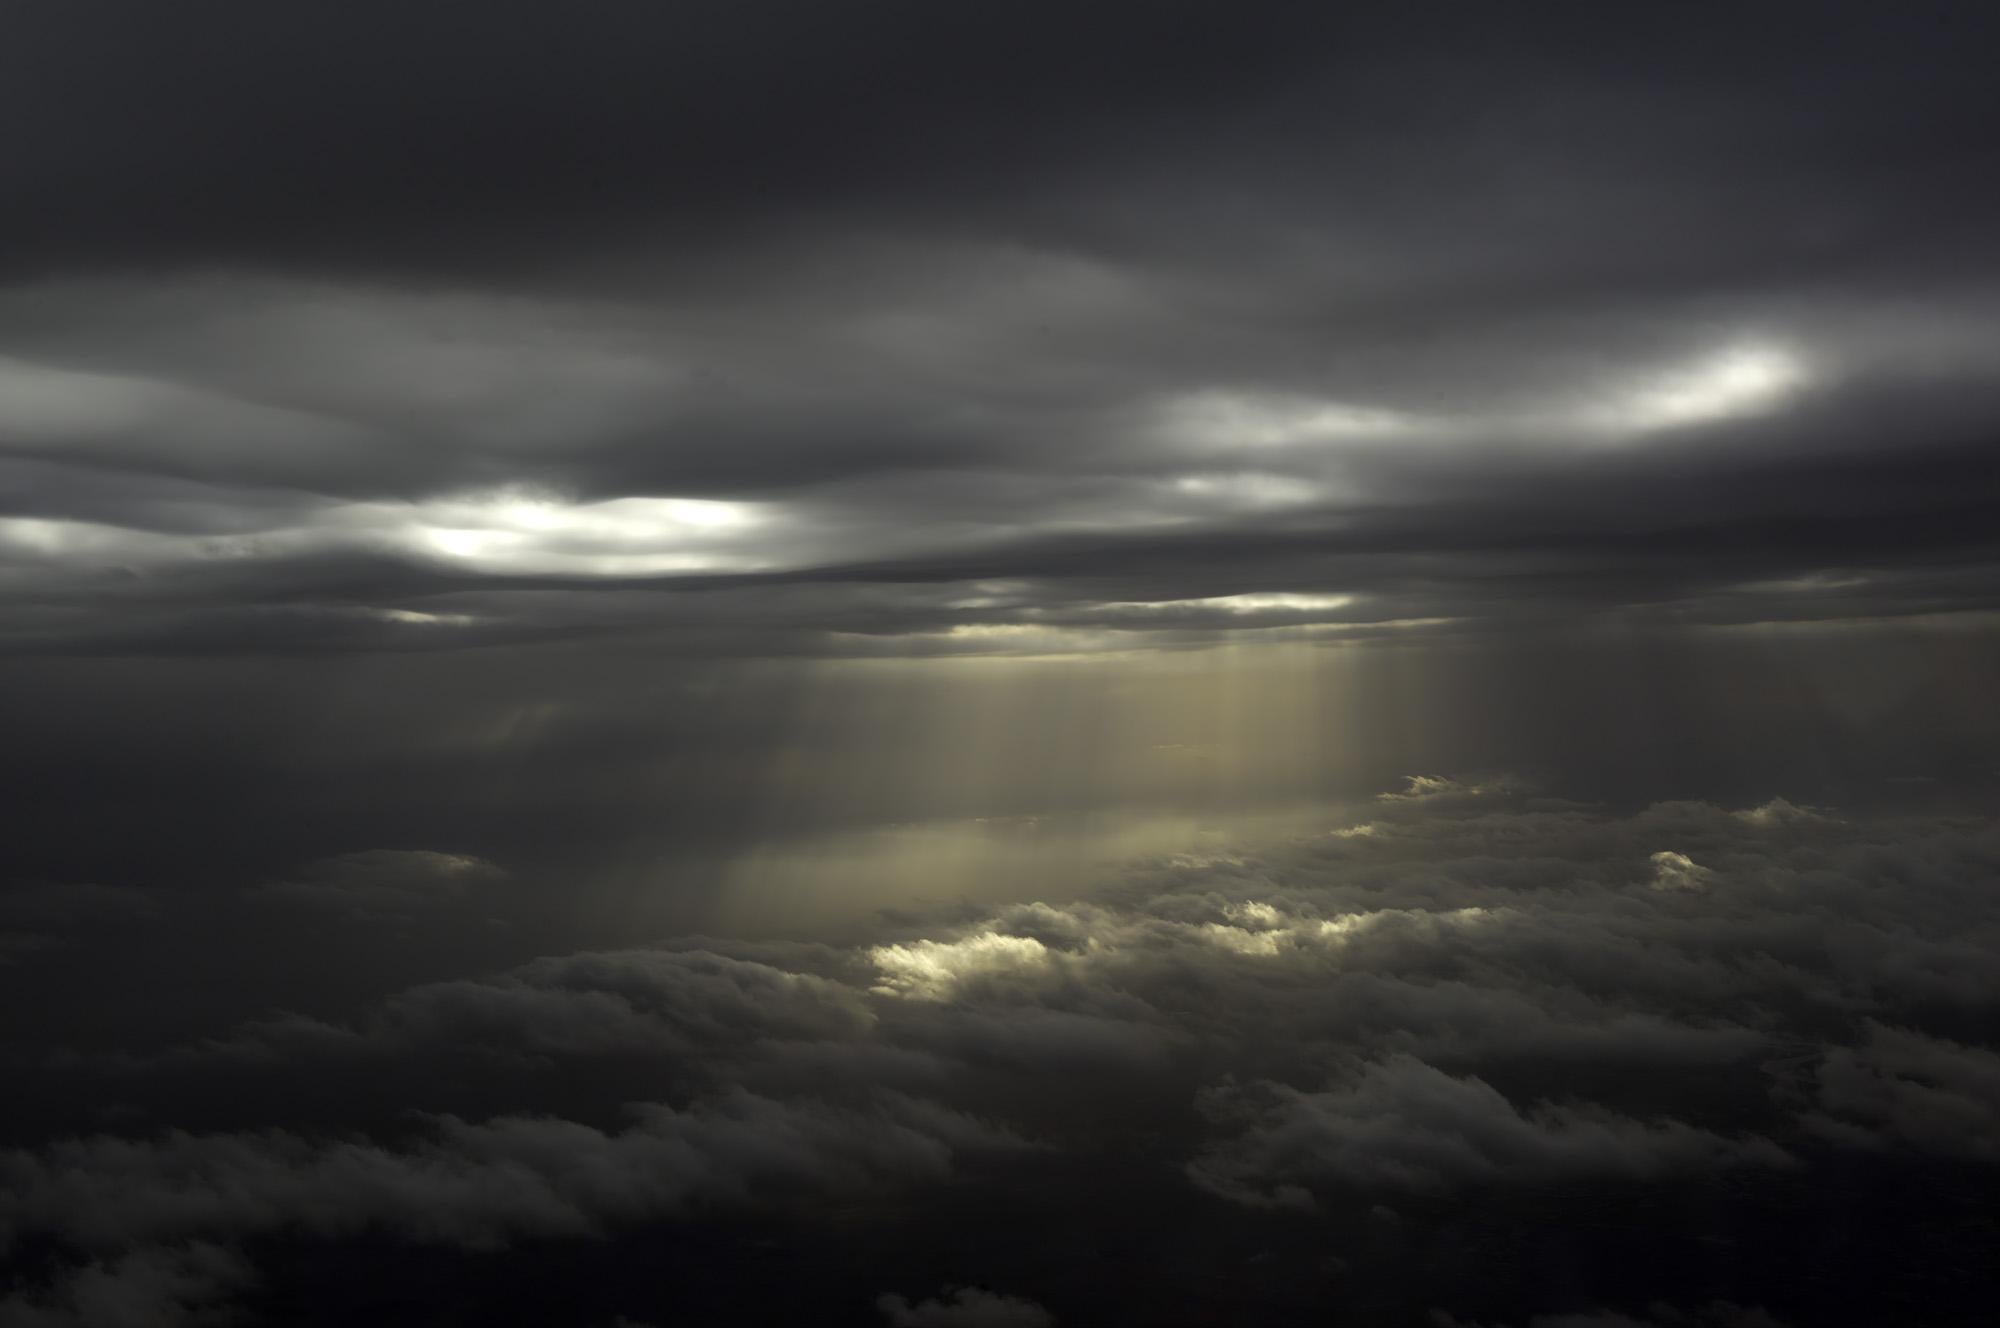 Sunrays in the clouds, Afghanistan 2012 - Limited Edition Fine Art Photography